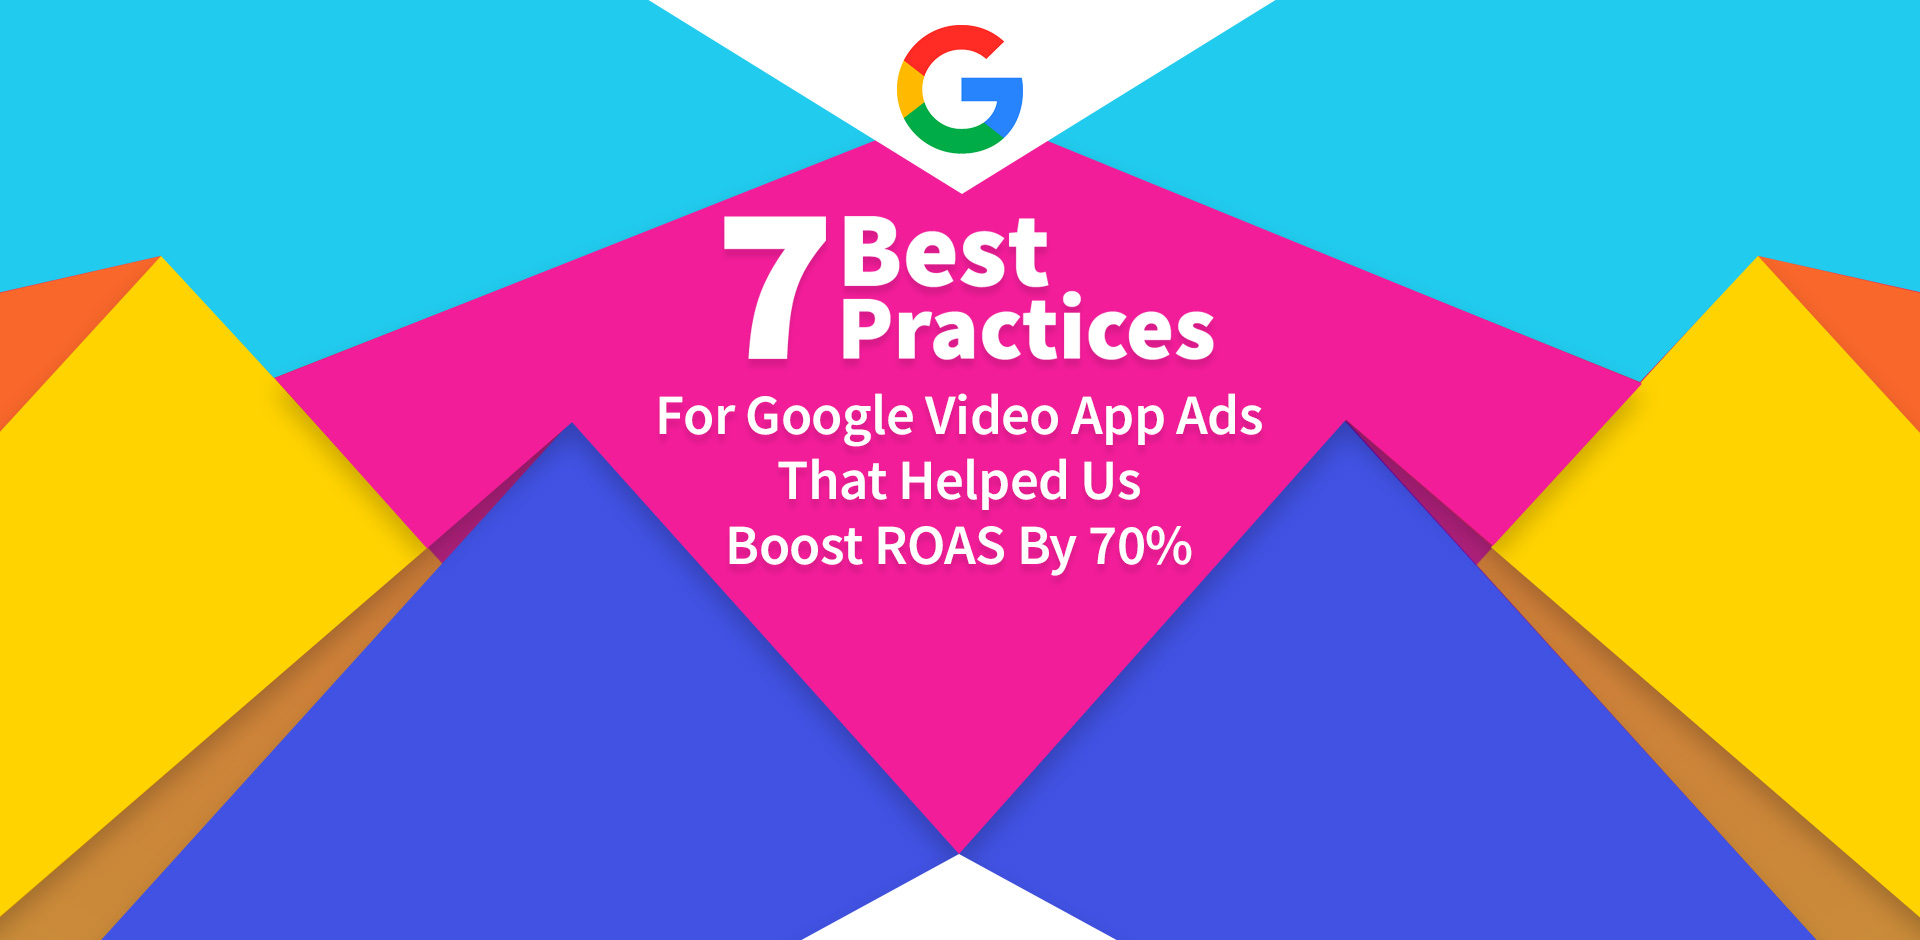 7 Best Practices for Google Video App Ads That Helped Us Boost ROAS By 70% *